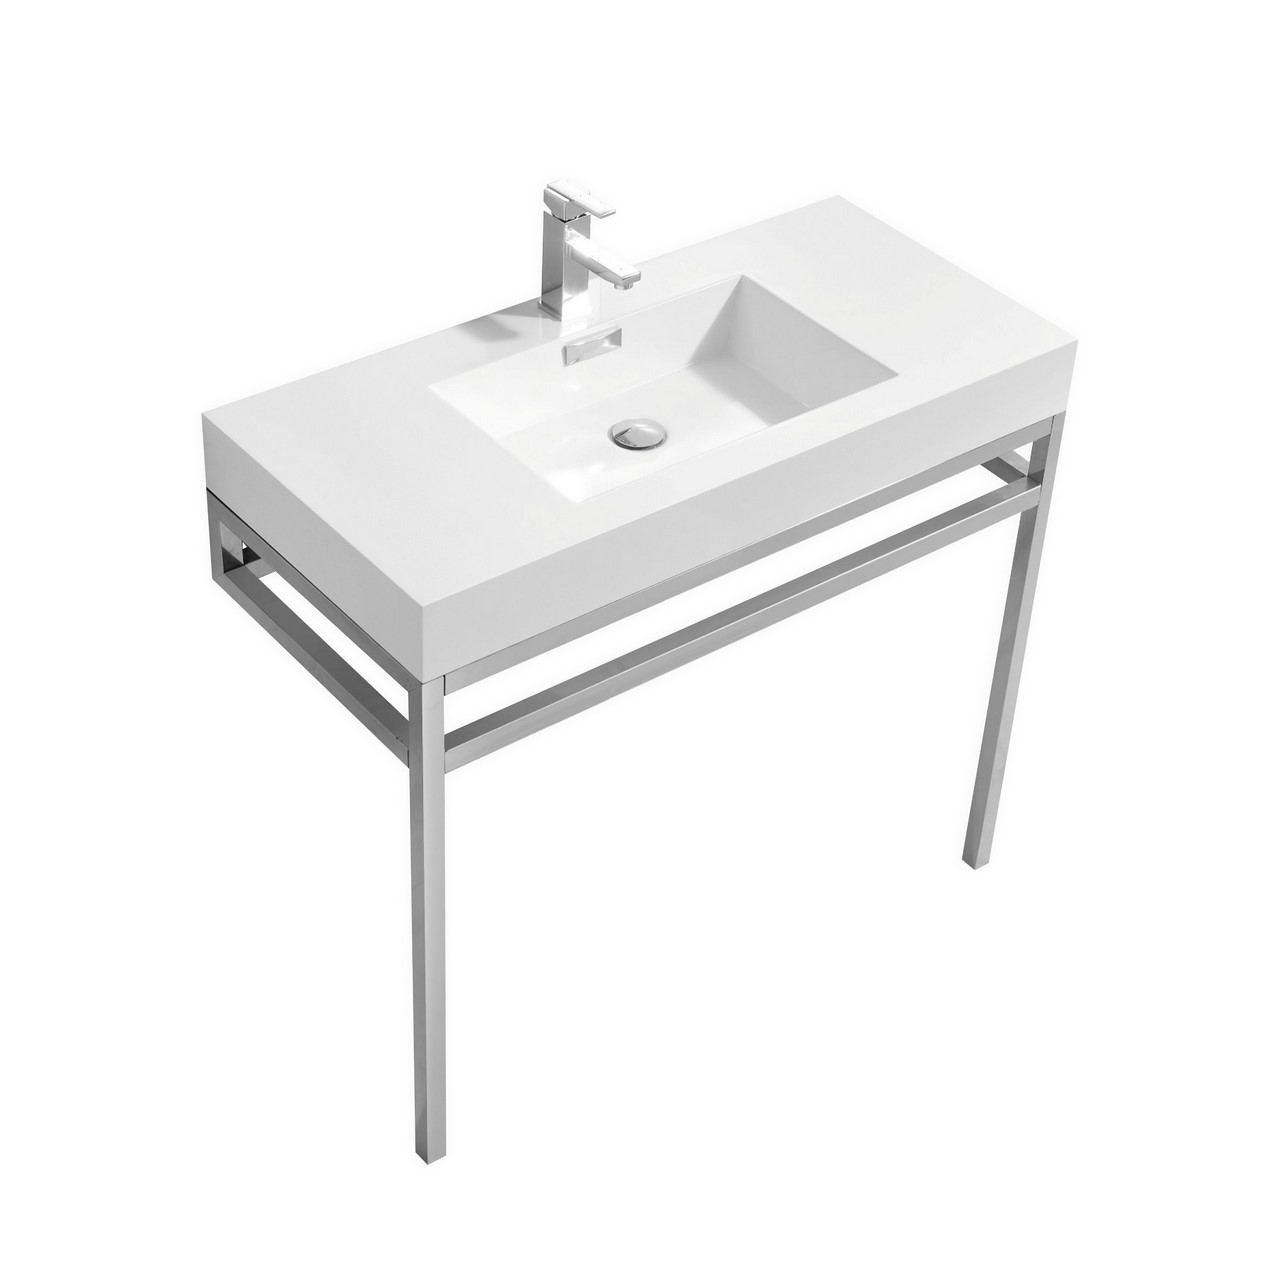 Modern Lux 36" Stainless Steel Console w/ White Acrylic Sink - Chrome